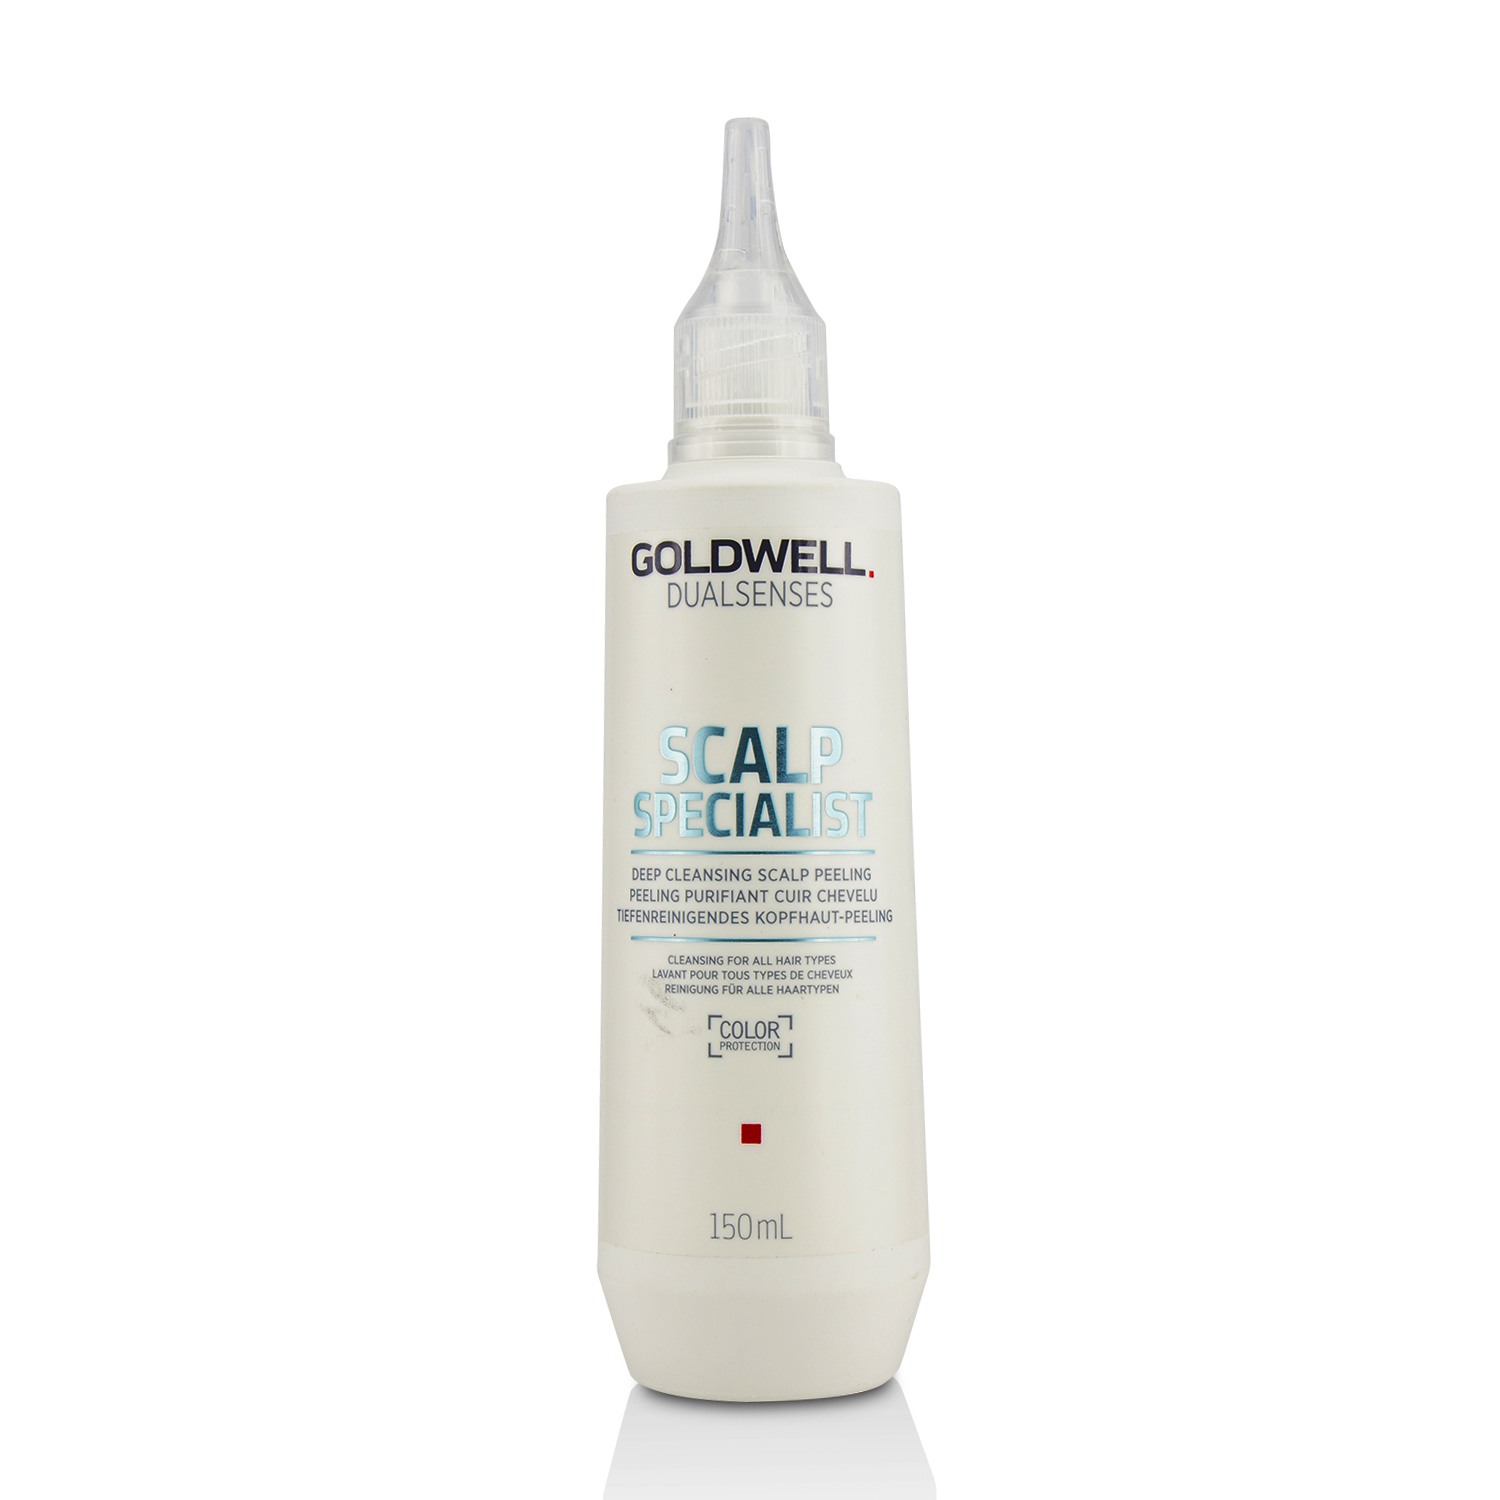 Dual Senses Scalp Specialist Deep Cleansing Scalp Peeling (Cleansing For All Hair Types) Goldwell Image